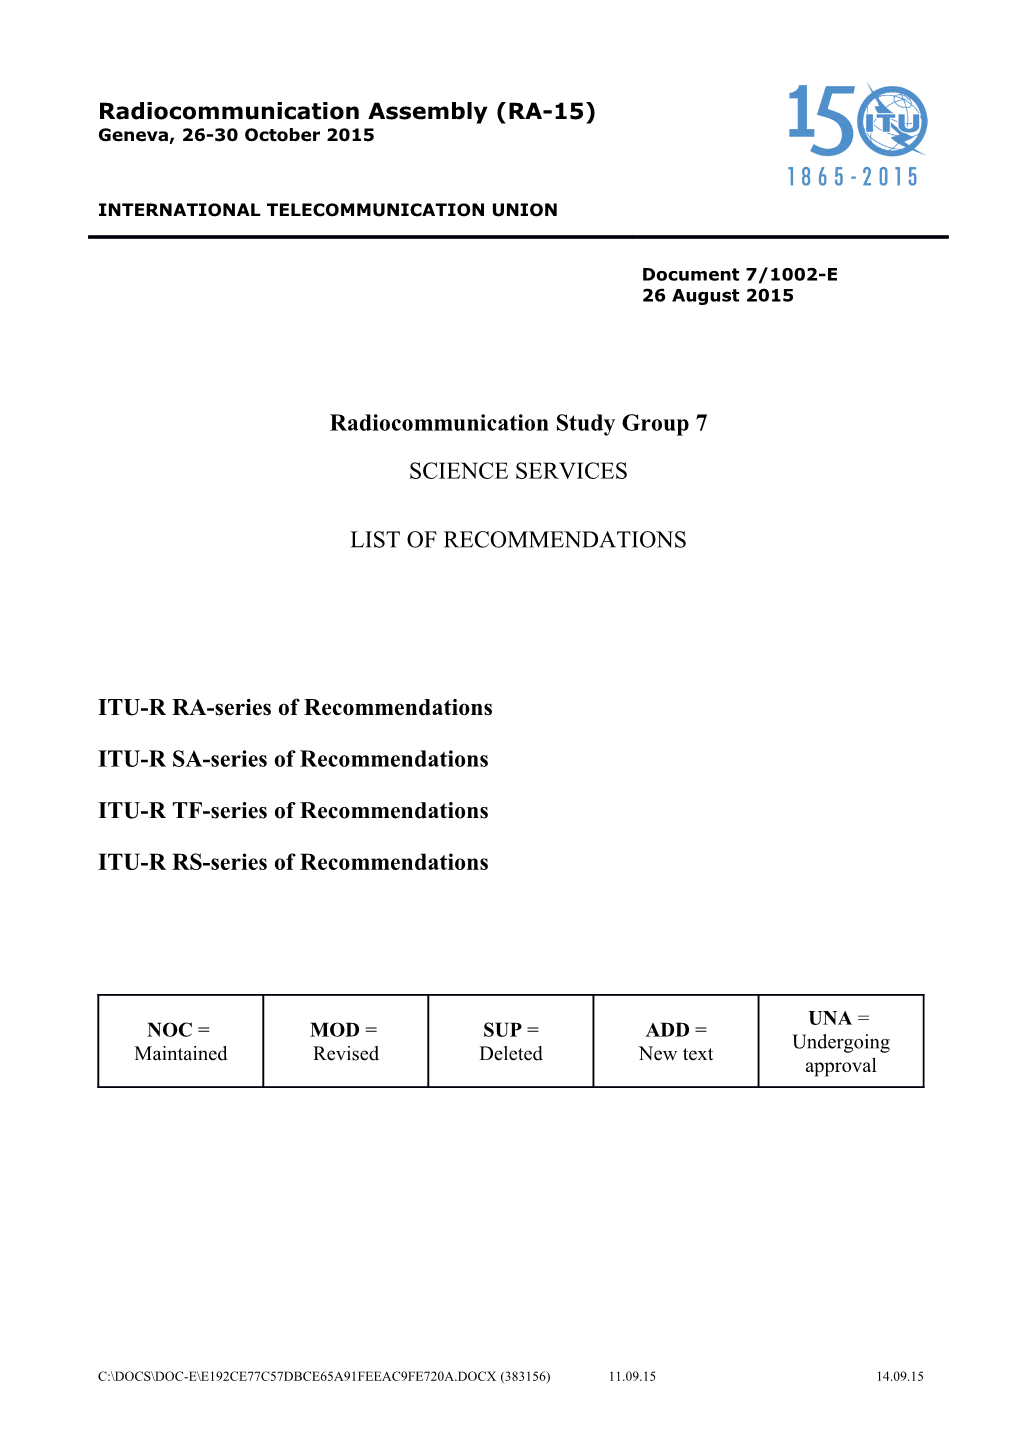 ITU-R RA-Series of Recommendations